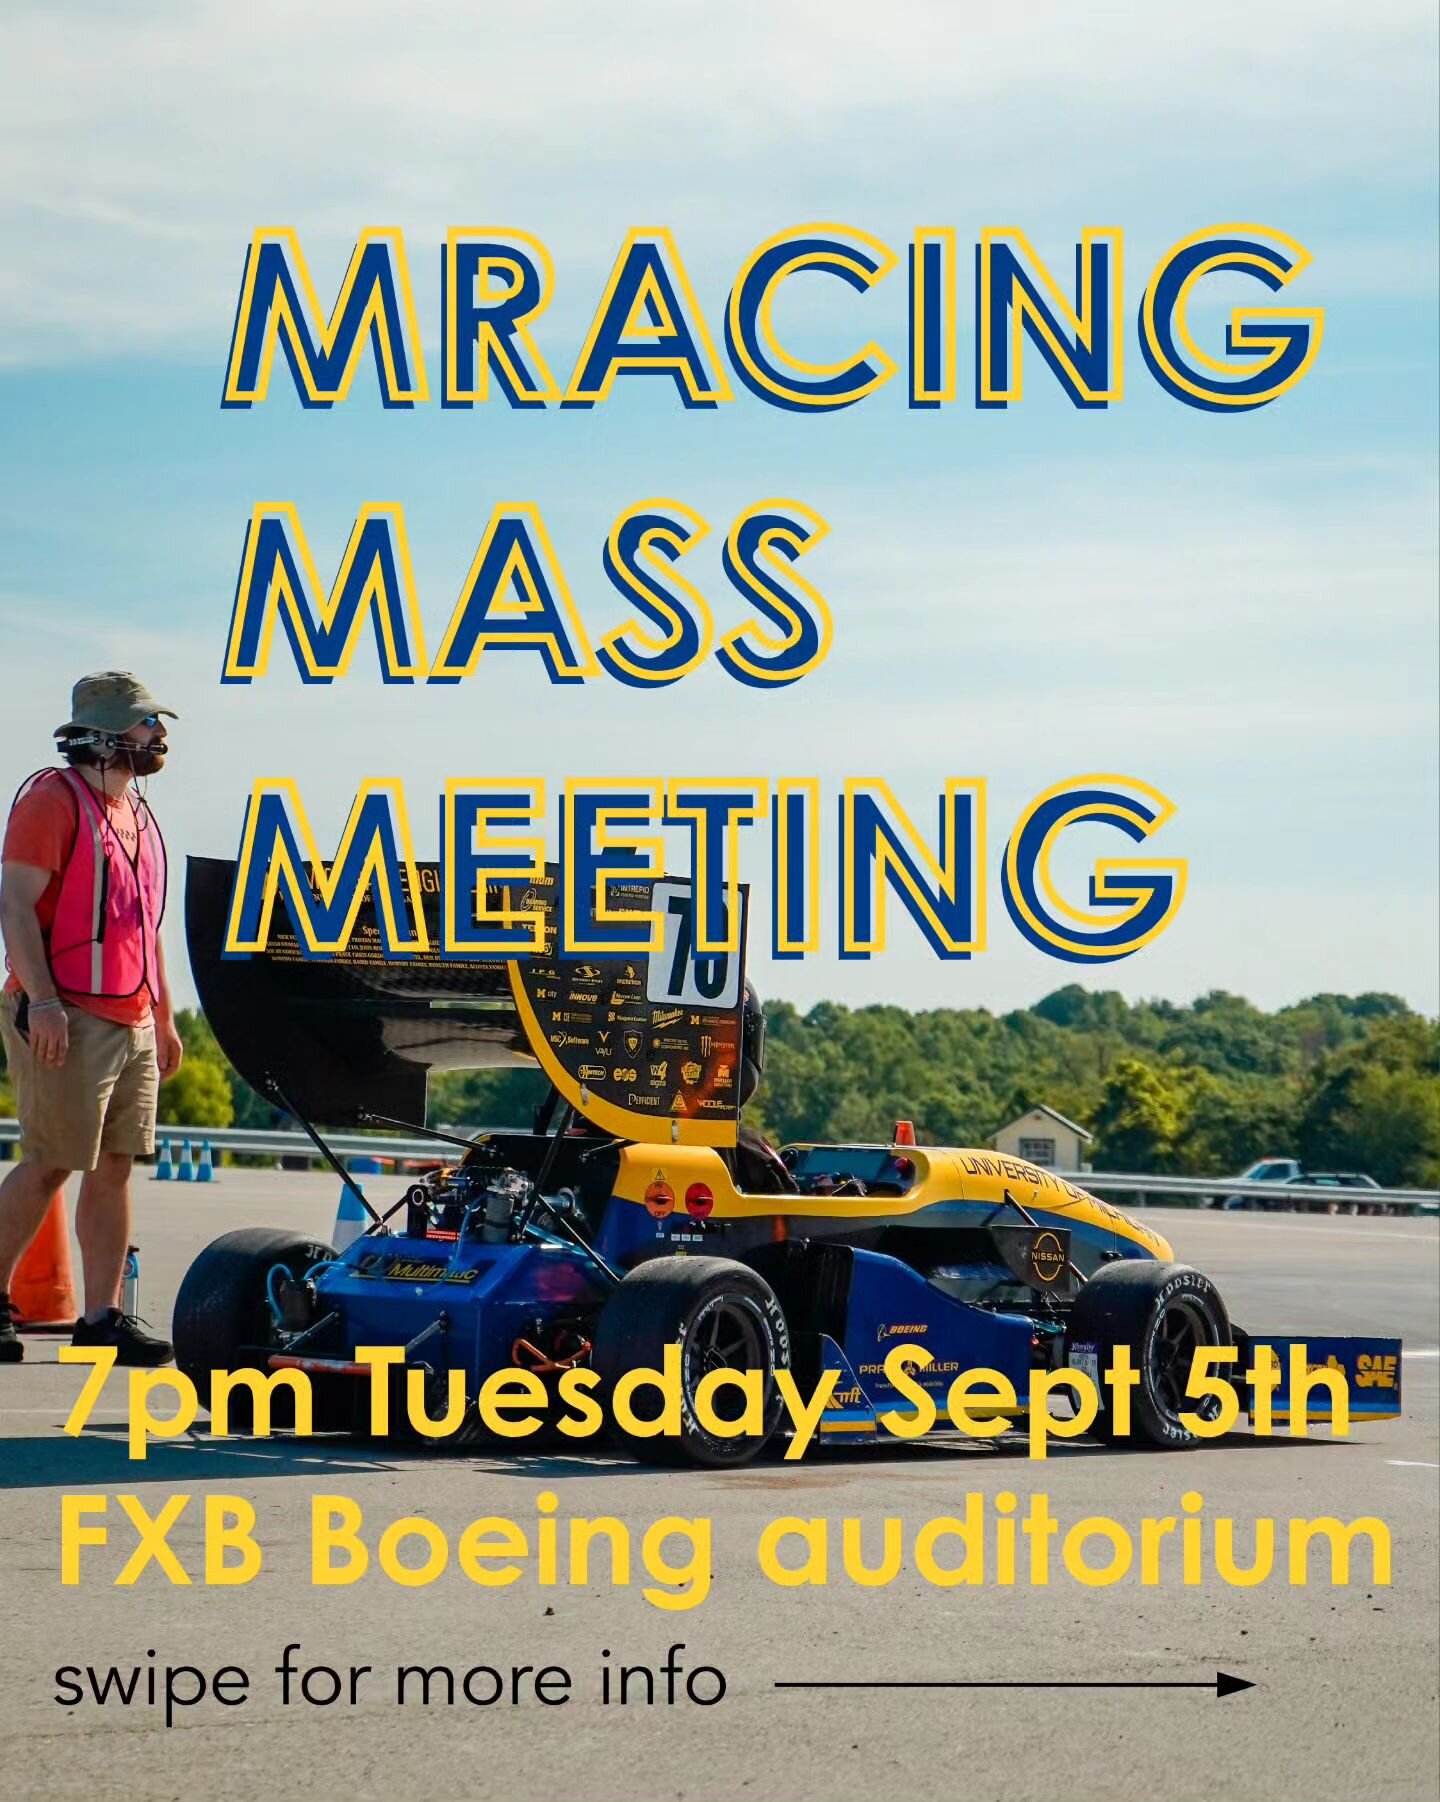 ATTENTION ALL NEW MEMBERS! 
Are you interested in joining MRacing?
Do you want to know more?
If the answer is yes then head to our mass meeting at 7pm Tuesday (that's tomorrow!)
I look forward to seeing you all there!